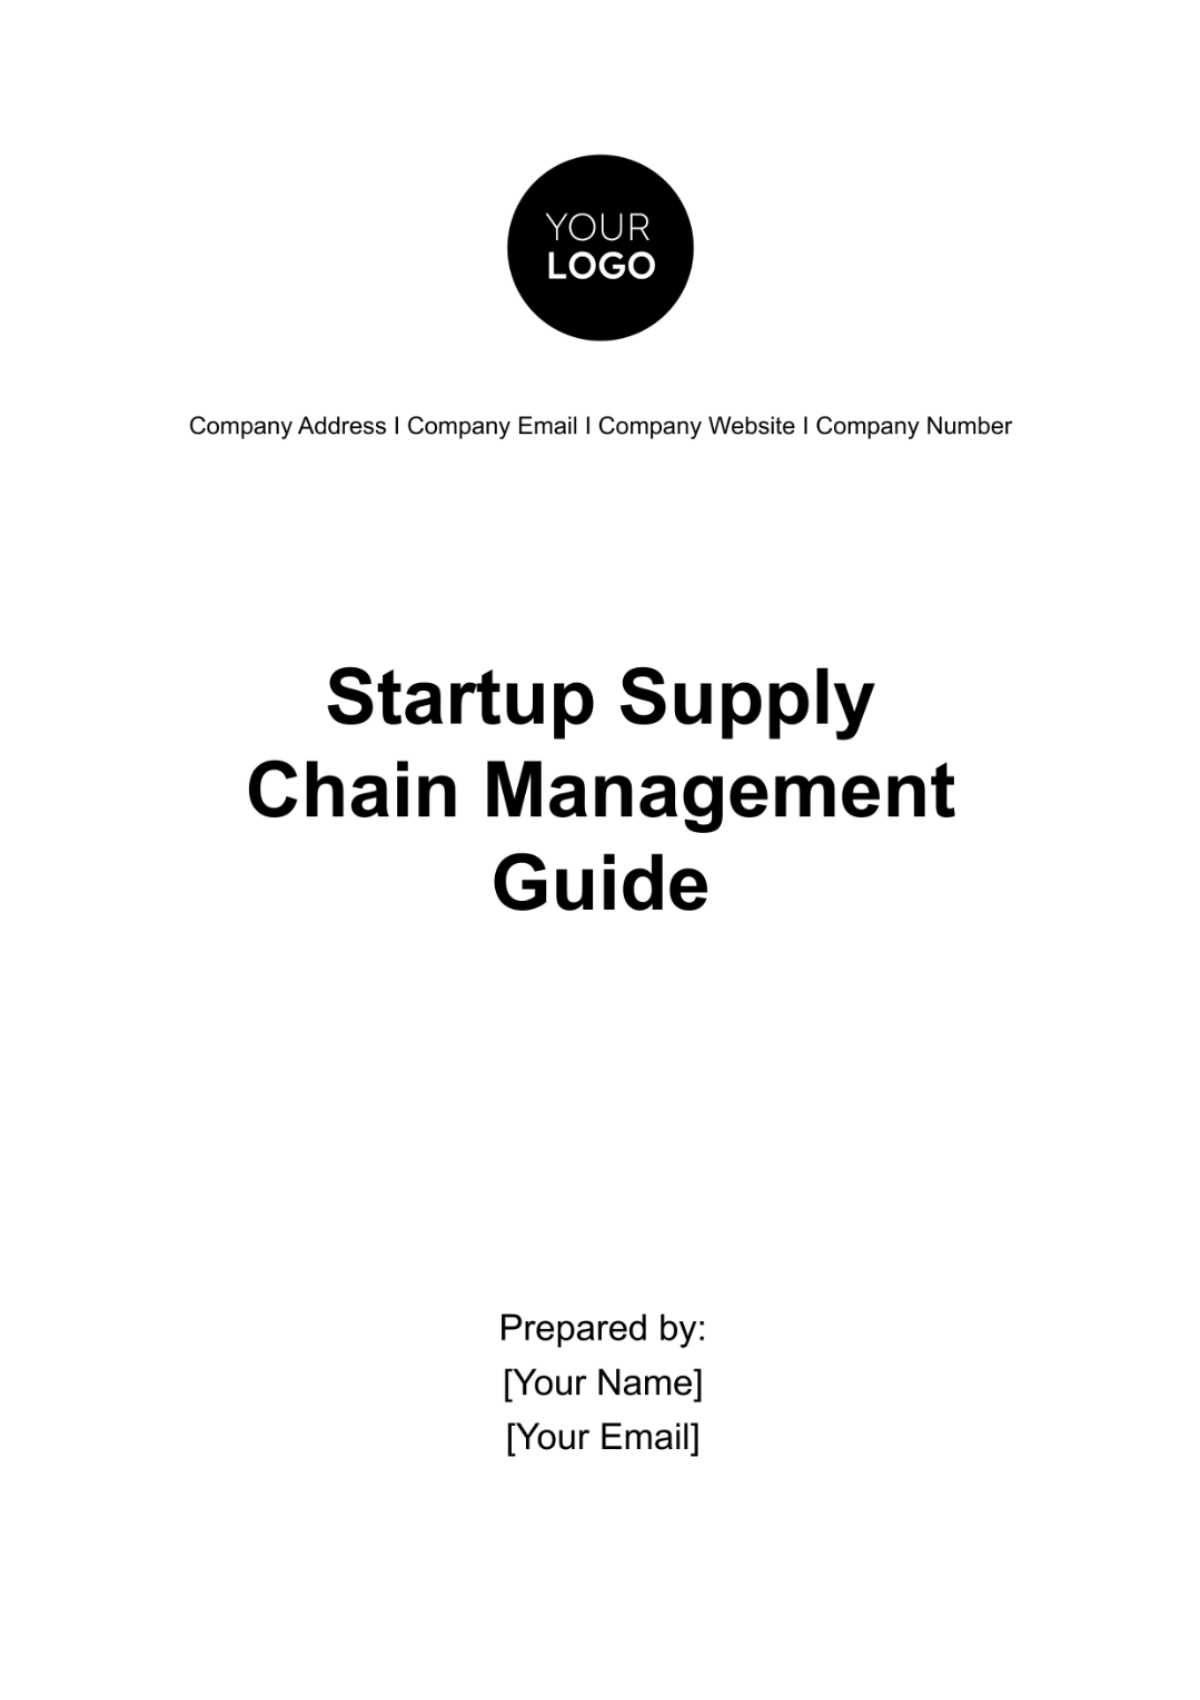 Startup Supply Chain Management Guide Template